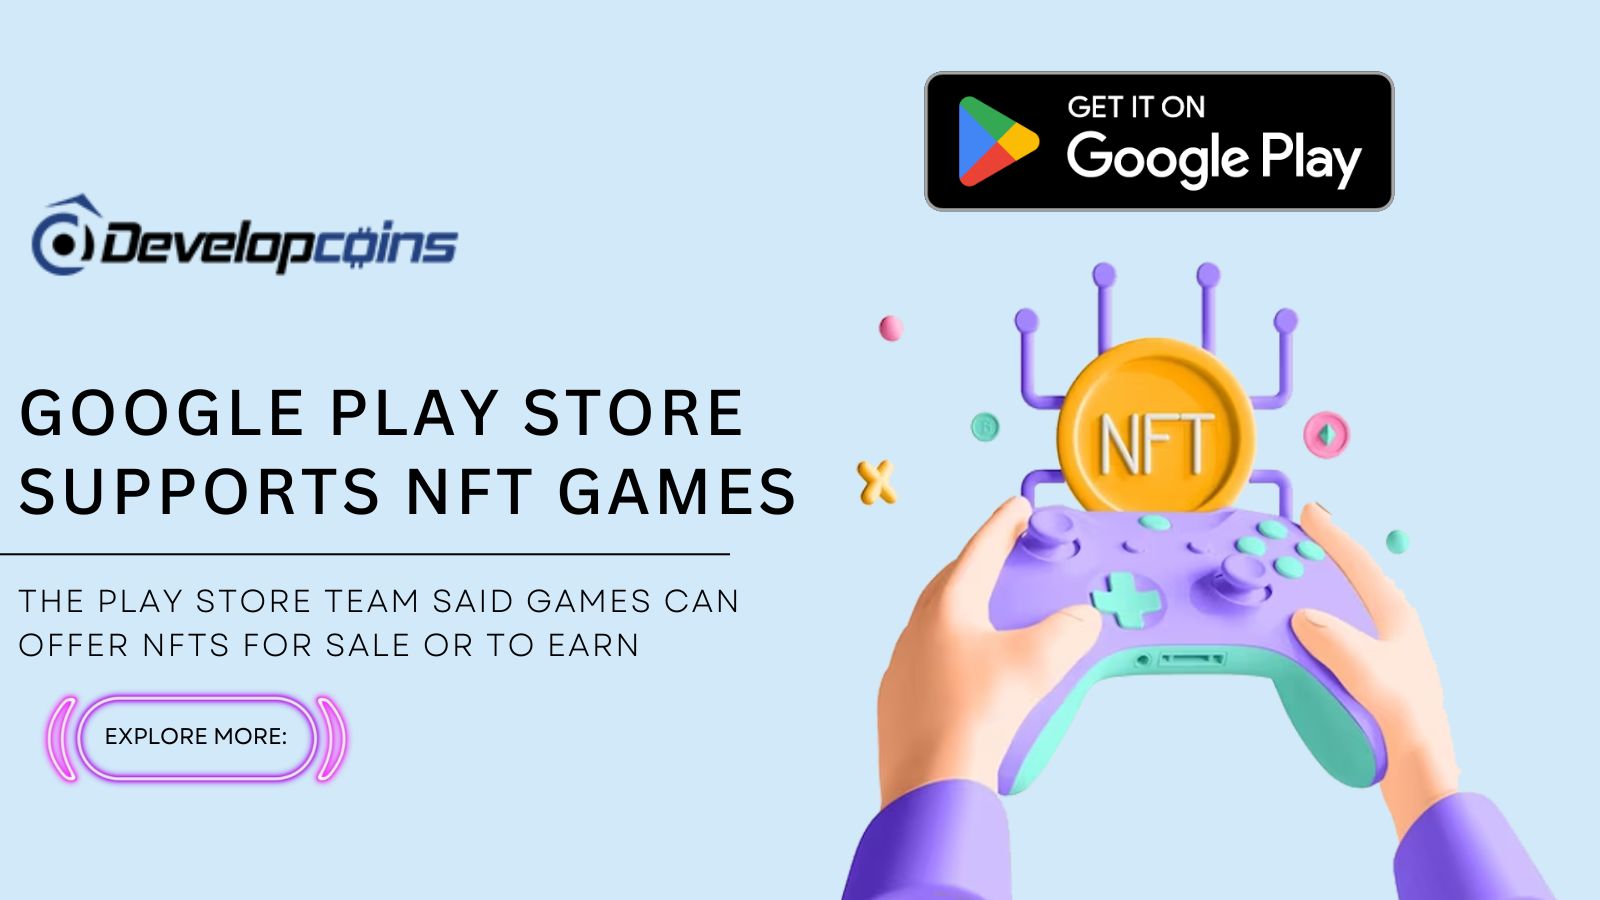 Google Play Store Embraces NFT Games: Opening Doors to New Digital Experiences